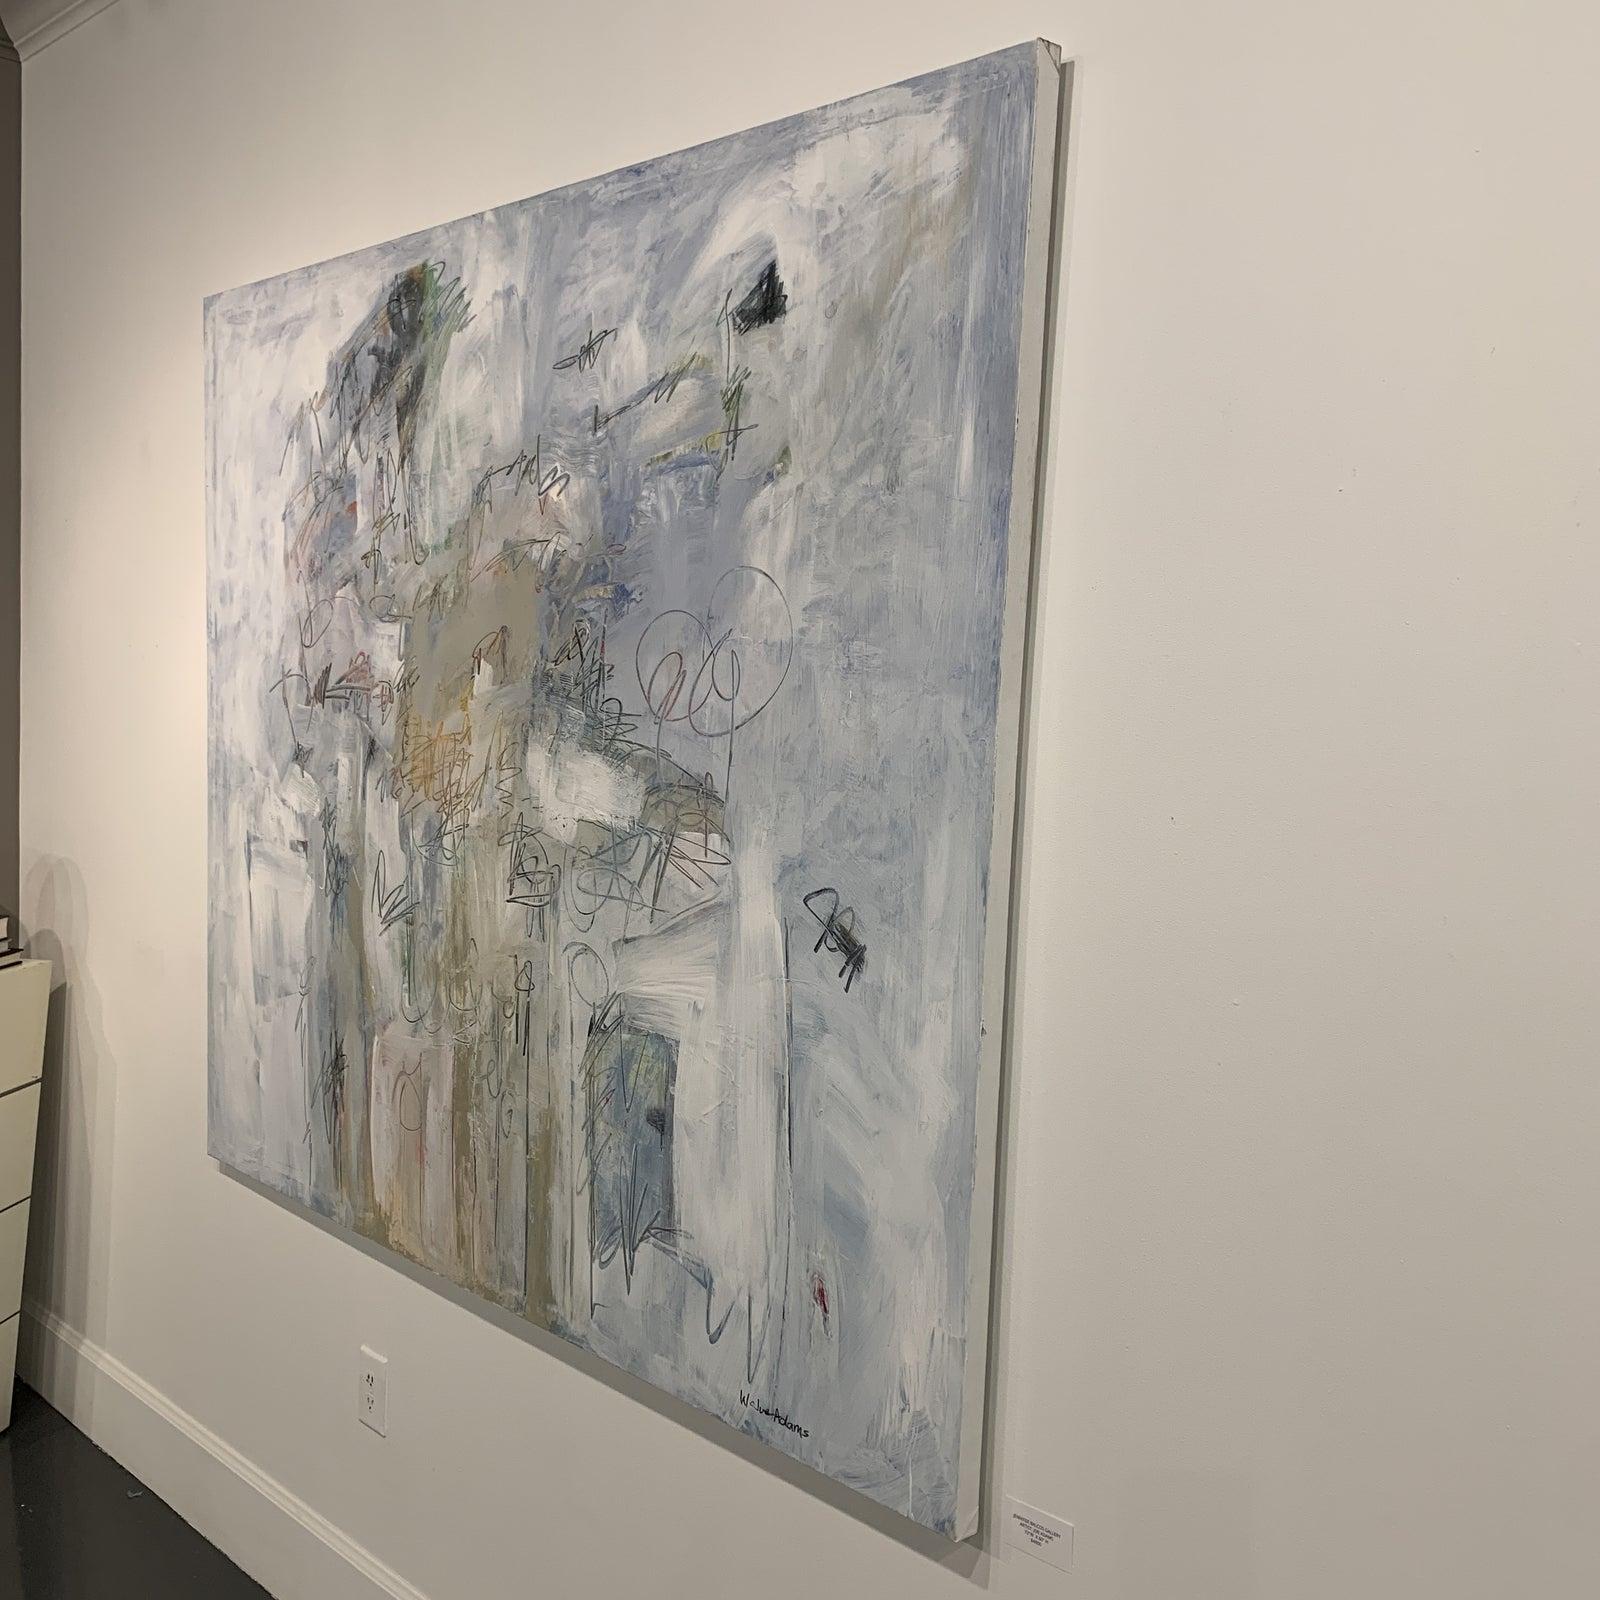 Large Scale Abstract Painting by Joe Adams

Signed on the lower front right
Blues , Taupes , Whites and black

Great for any room especially a living space. Soft palette with a Cy Thombly style

“A lifetime,” Joe Adams states in response to the